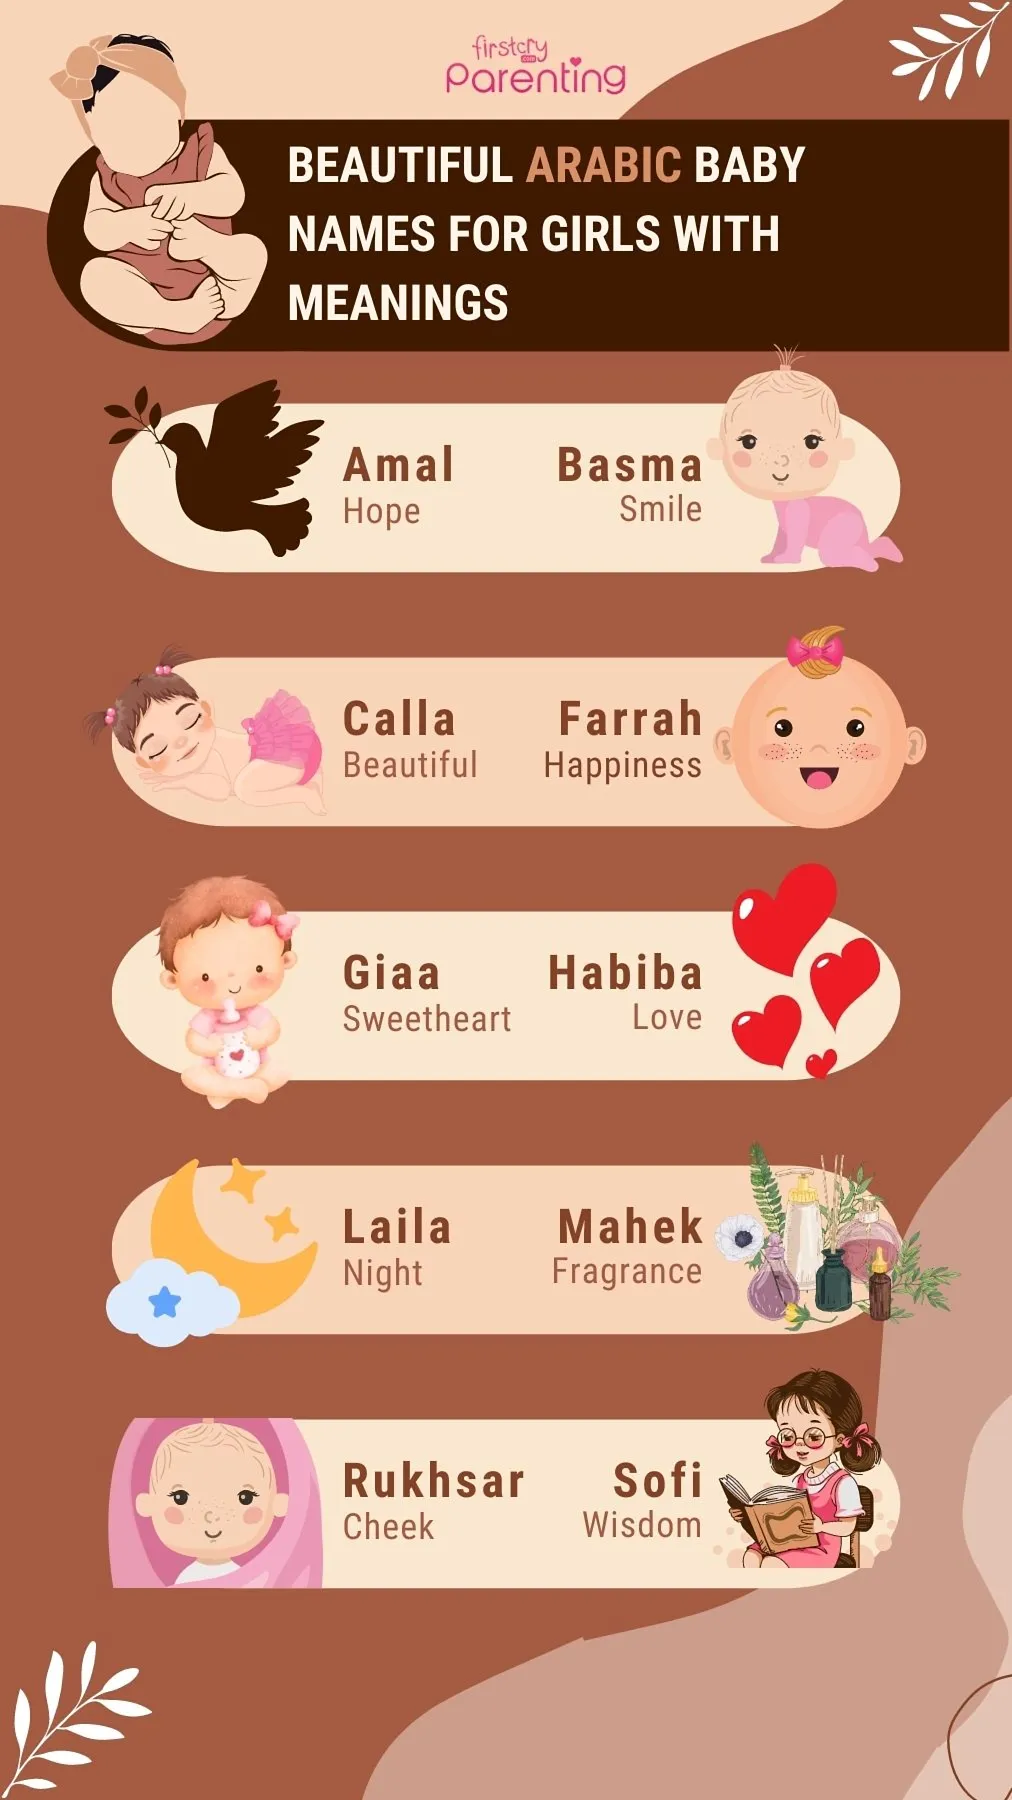 Beautiful Arabic Baby Names for Girls With Meanings